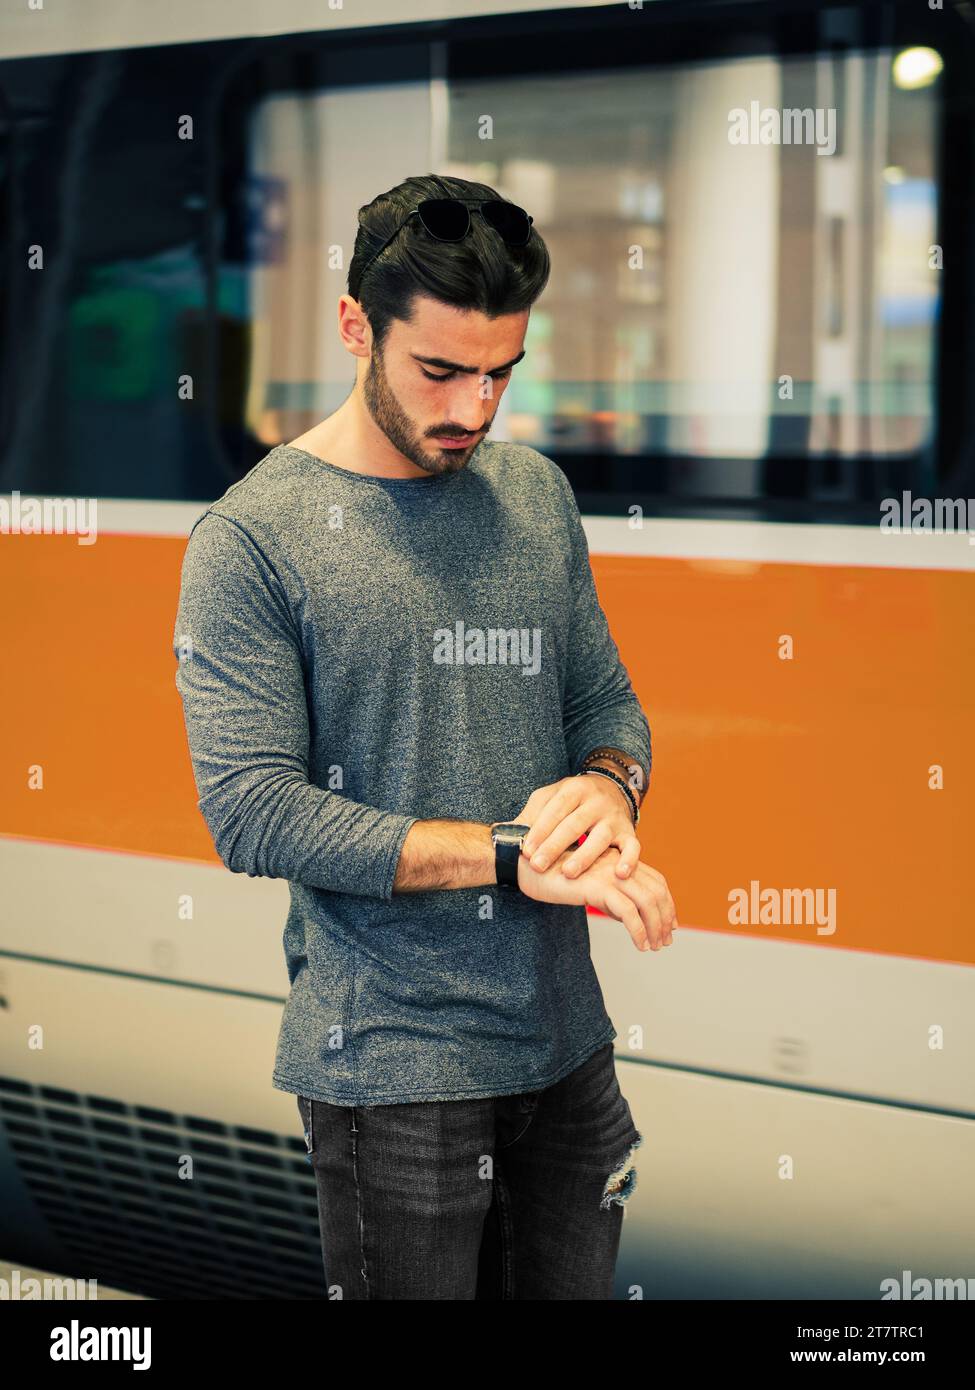 A man standing in front of a red and white train, looking at his wrist watch to check the time Stock Photo